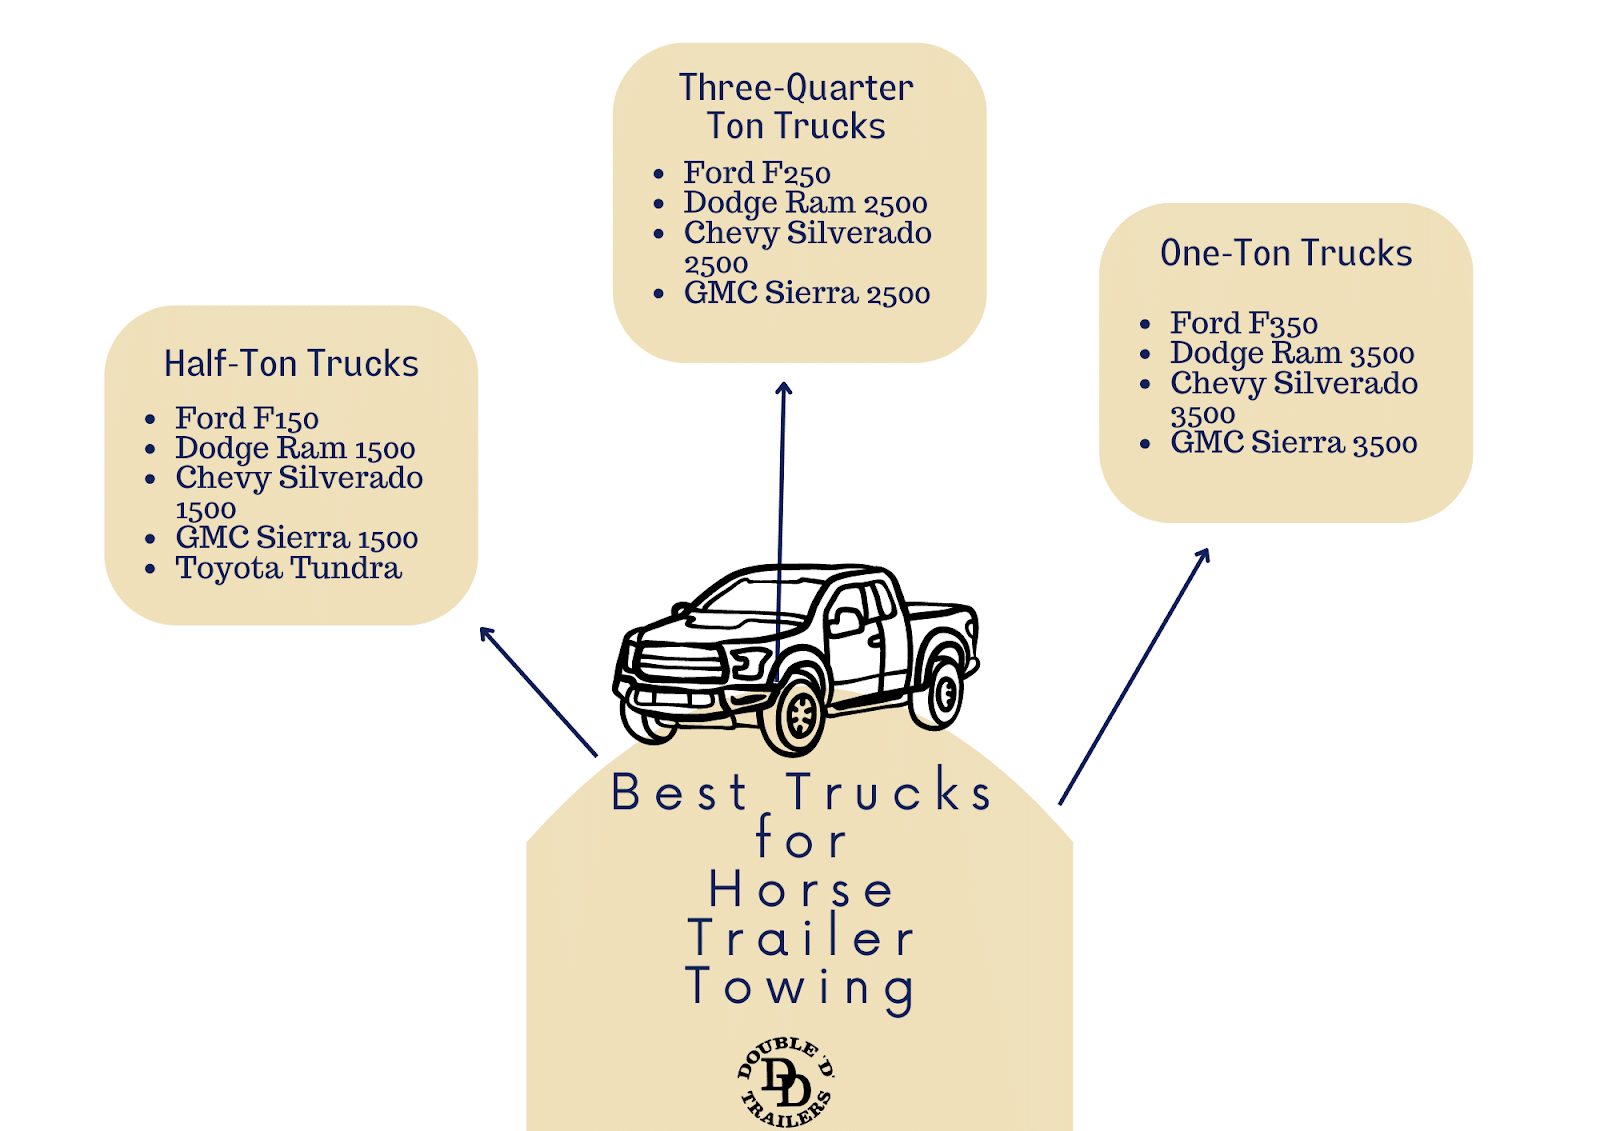 A chart displaying the best trucks for towing horse trailers